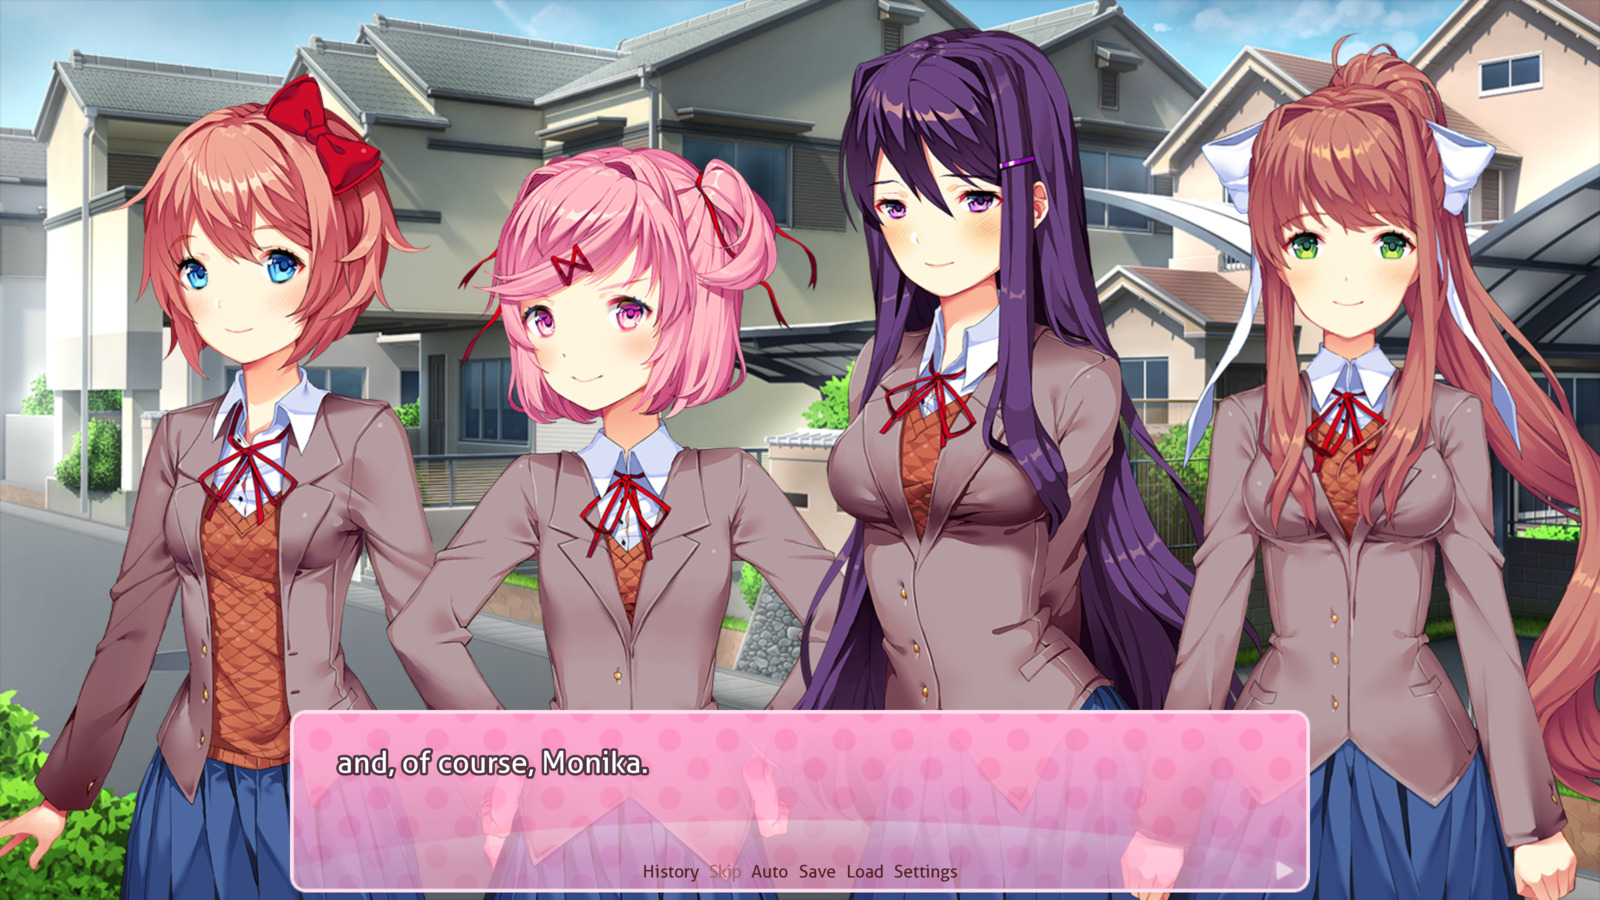 All Four Doki Doki Characters in front of a neighborhood